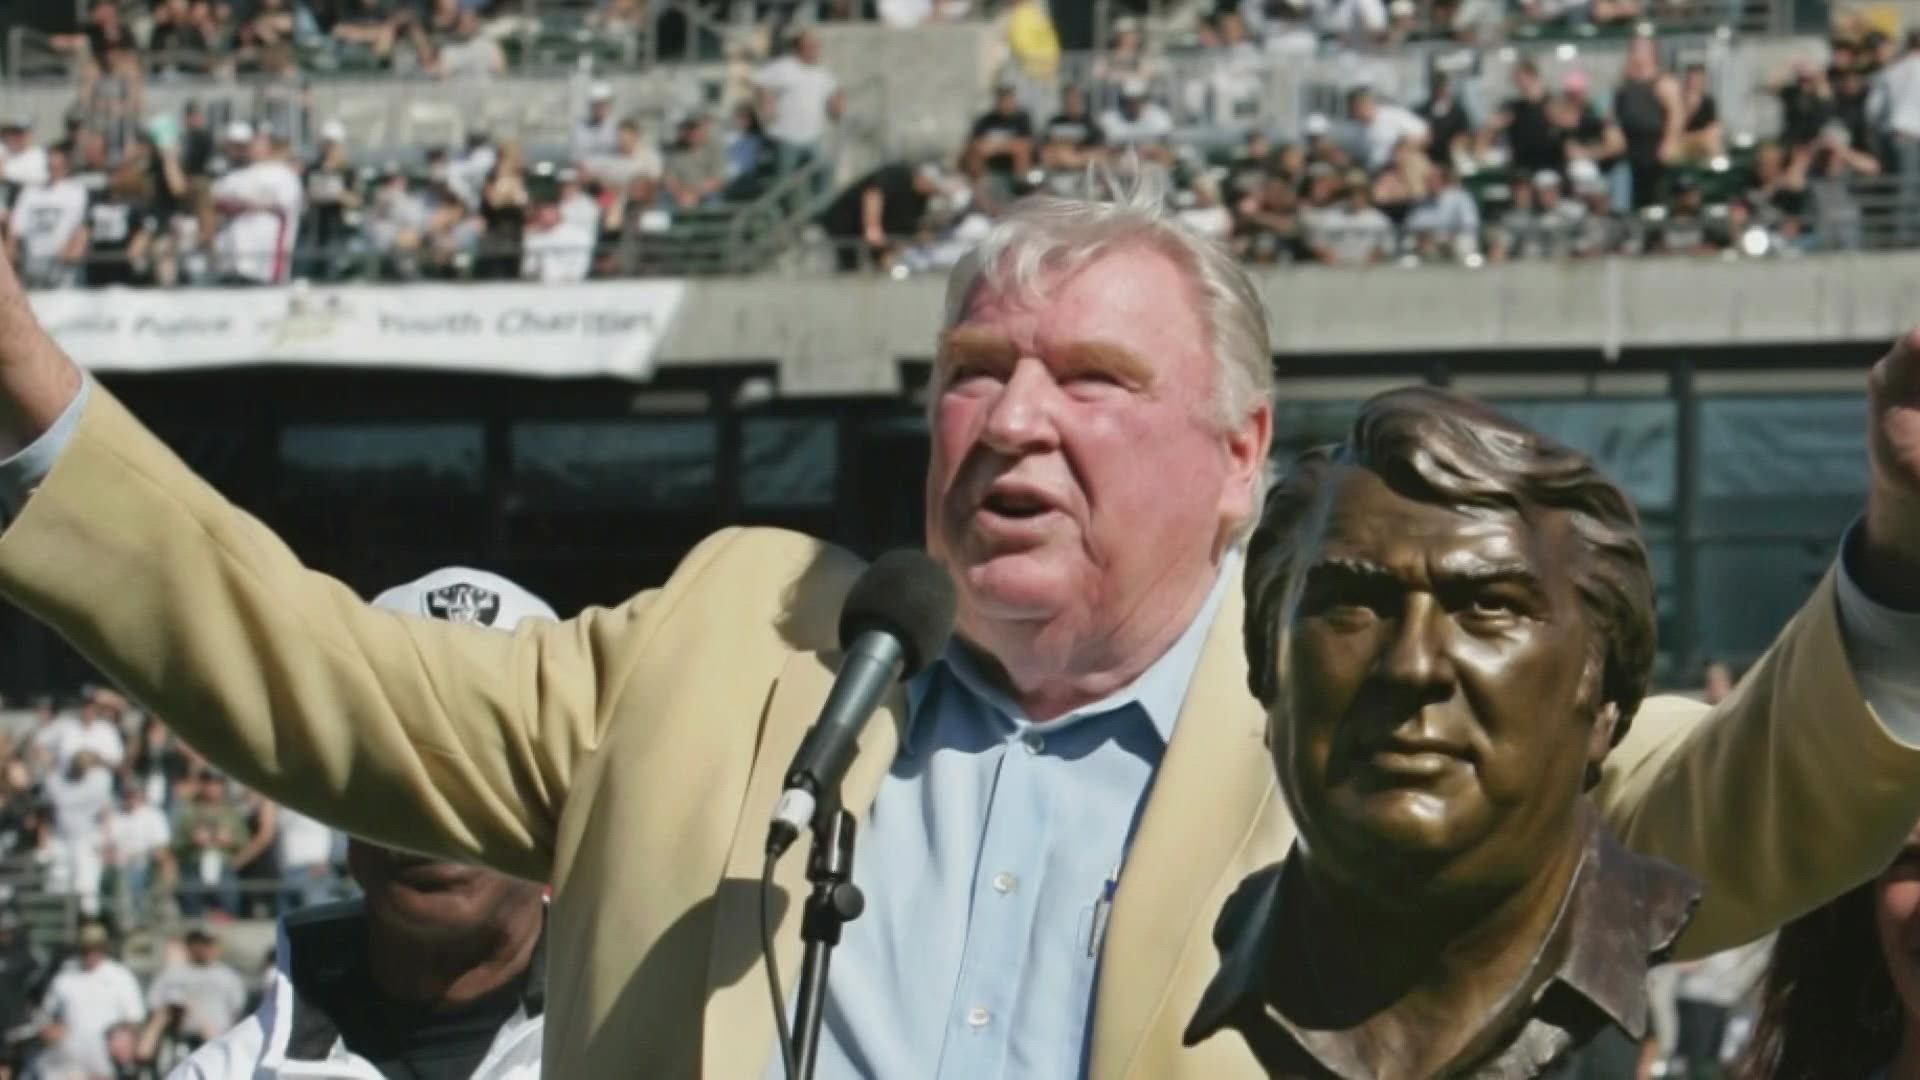 After the passing of John Madden, many remember his legacy and contribution to esports in video games.